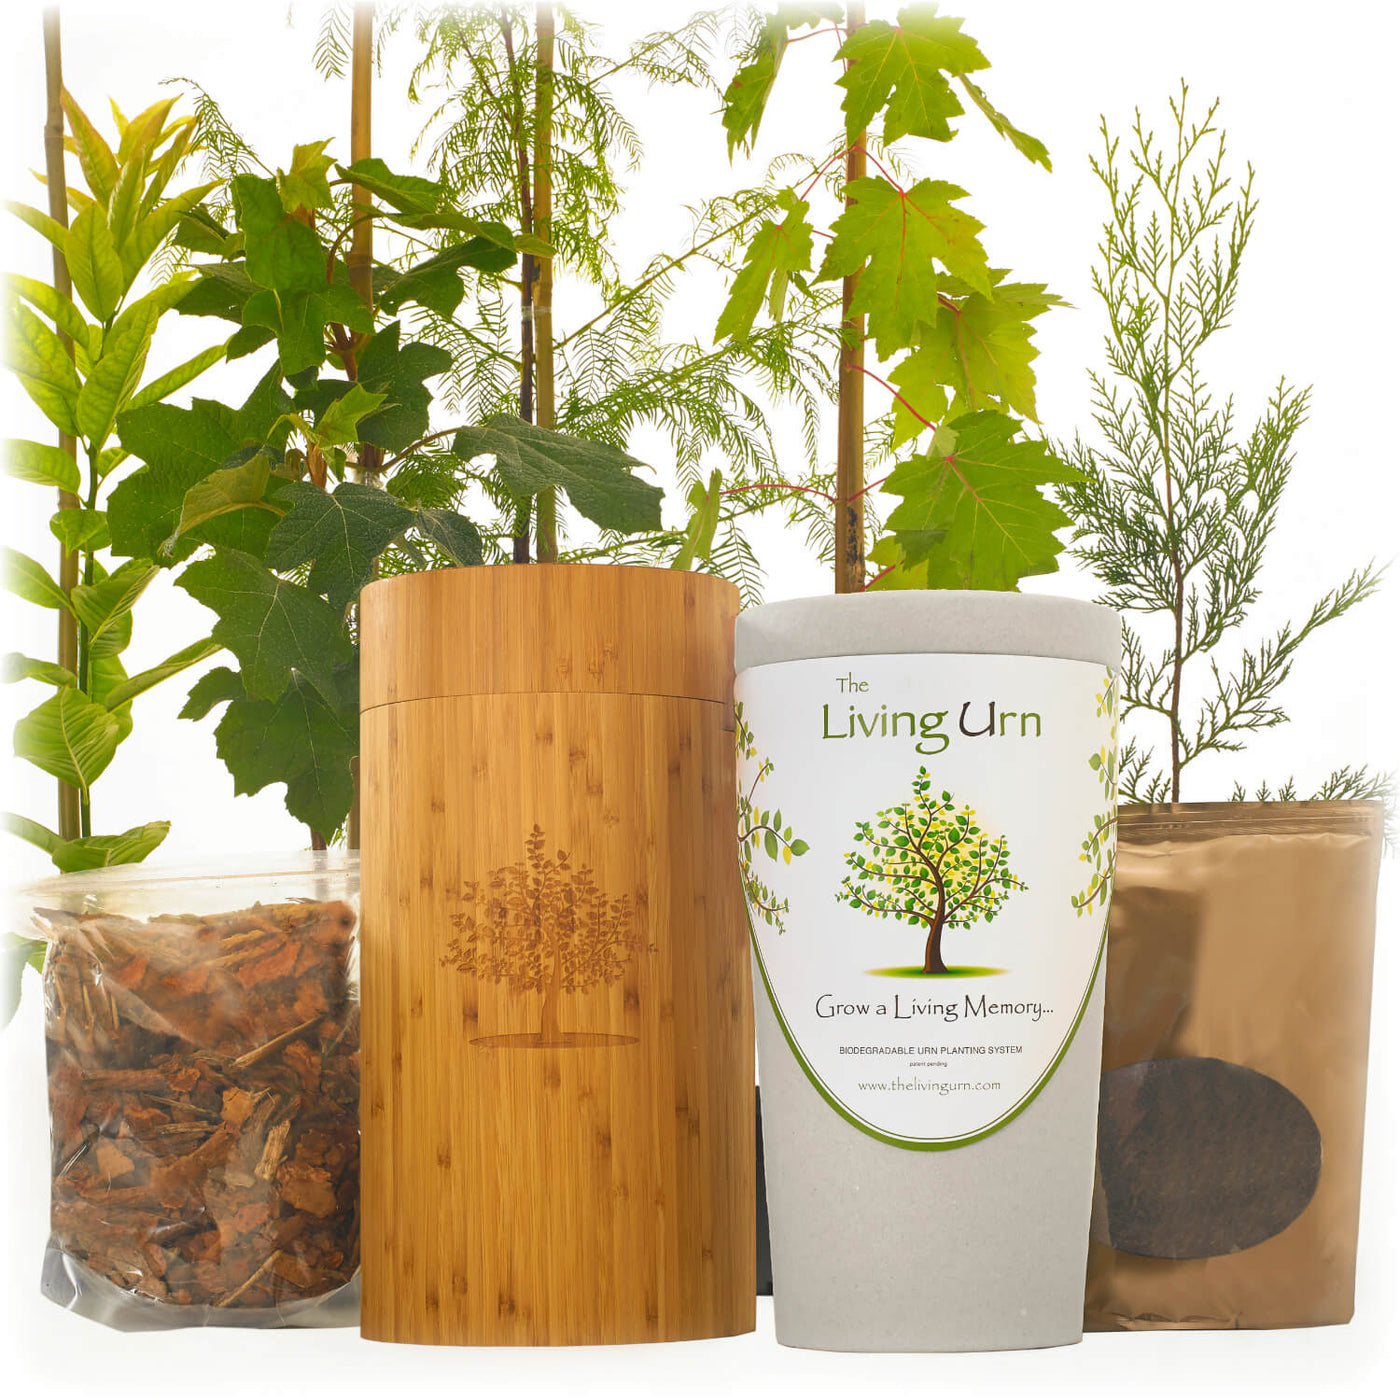 The Living Urn with a Voucher for a Tree - Messenger